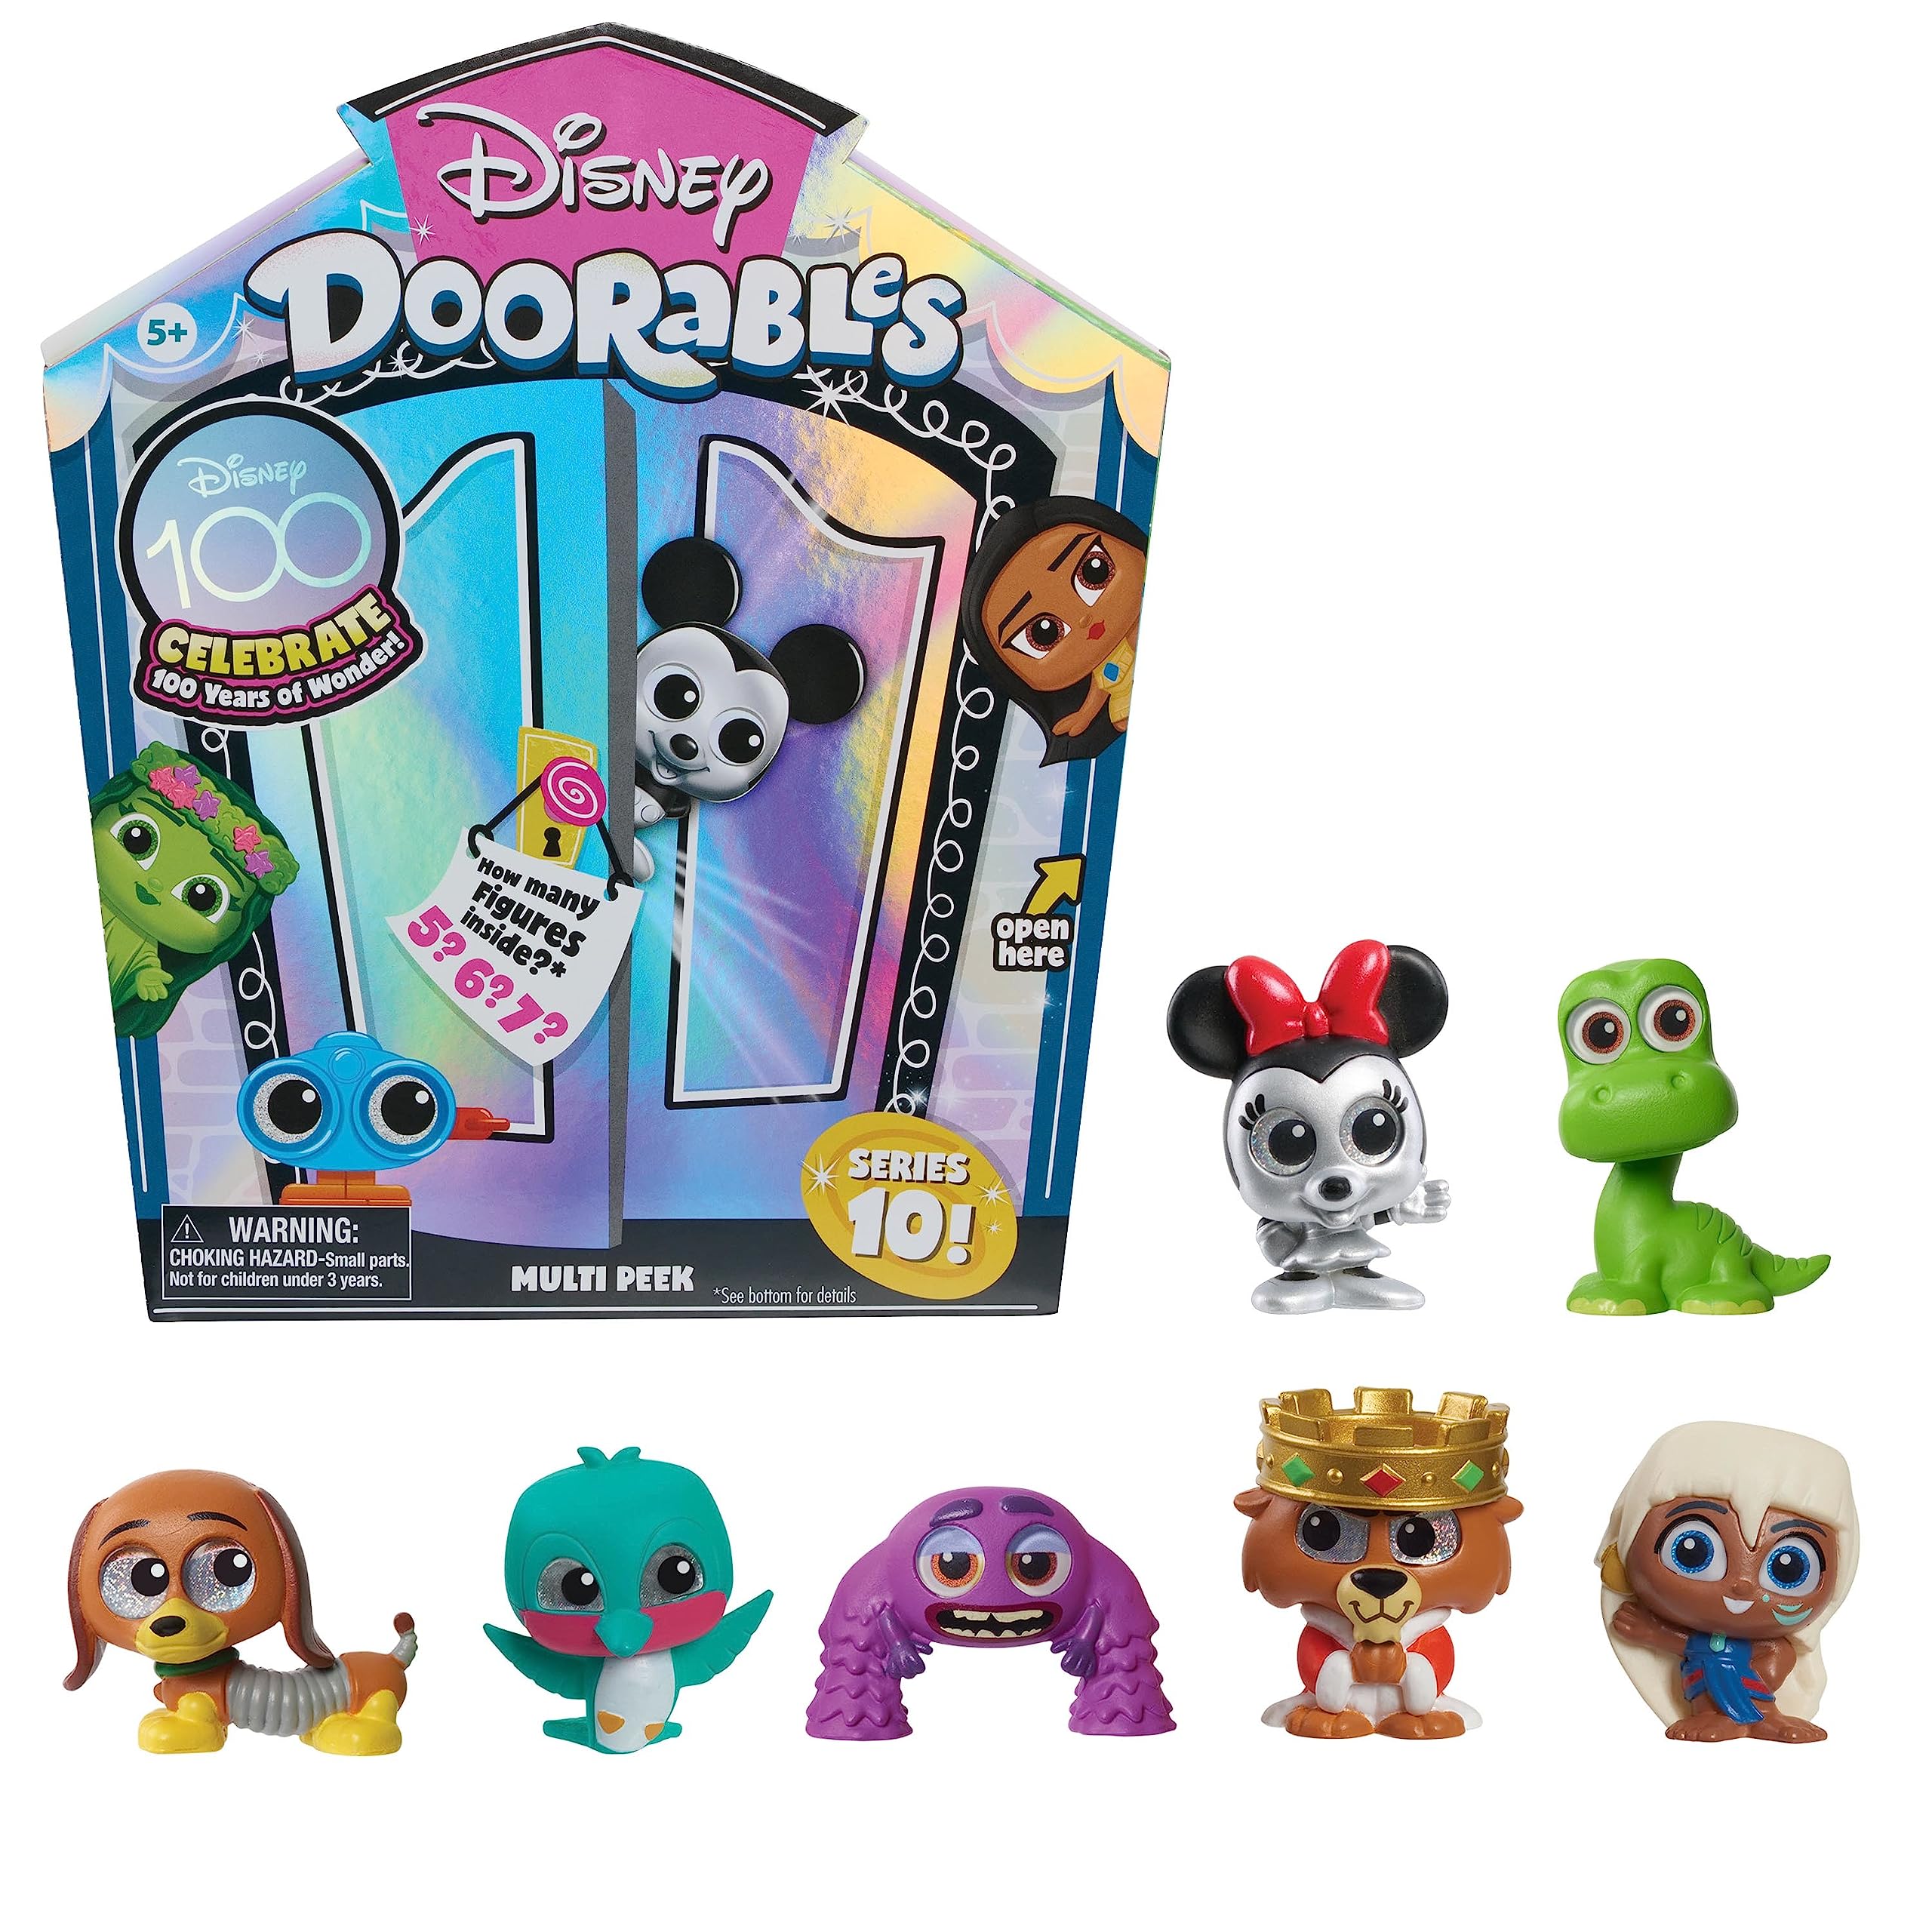 DOORABLES Disney New Multi Peek Series 10, Collectible Blind Bag Figures, Styles May Vary, Officially Licensed Kids Toys for Ages 5 Up, Gifts and Presents by Just Play